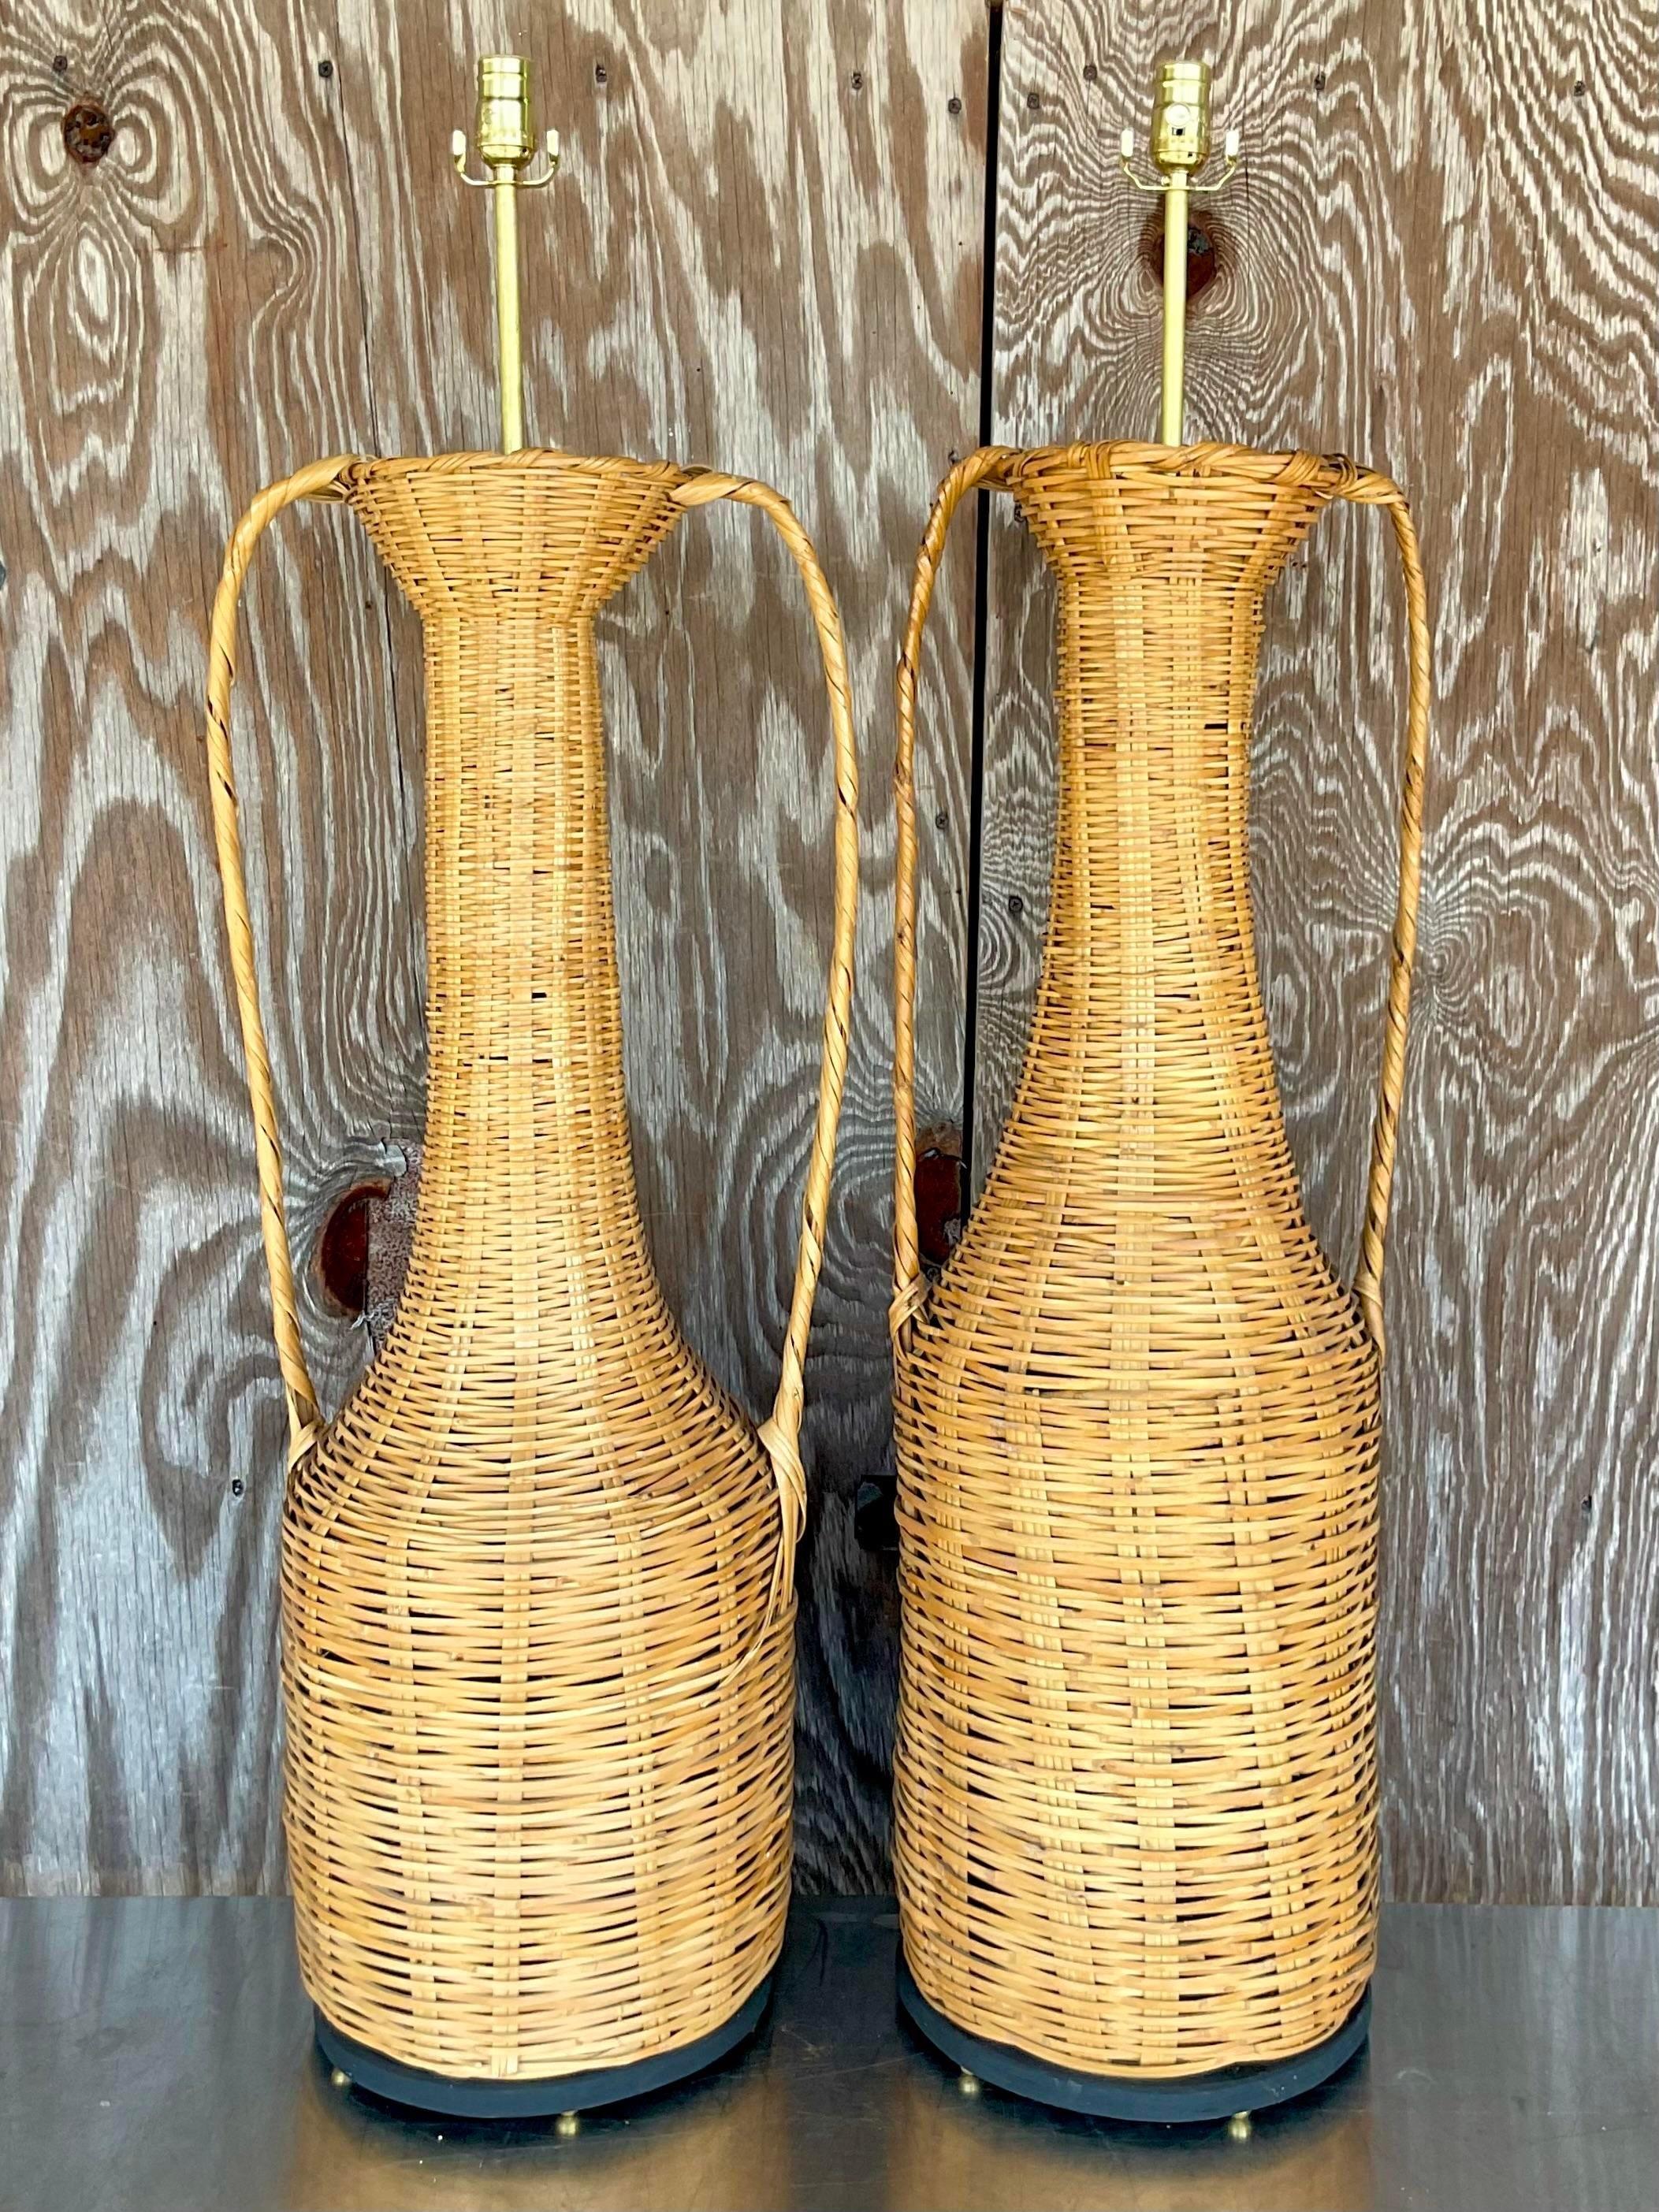 Vintage Boho Woven Rattan Urn Lamps - Set of 2 In Good Condition For Sale In west palm beach, FL